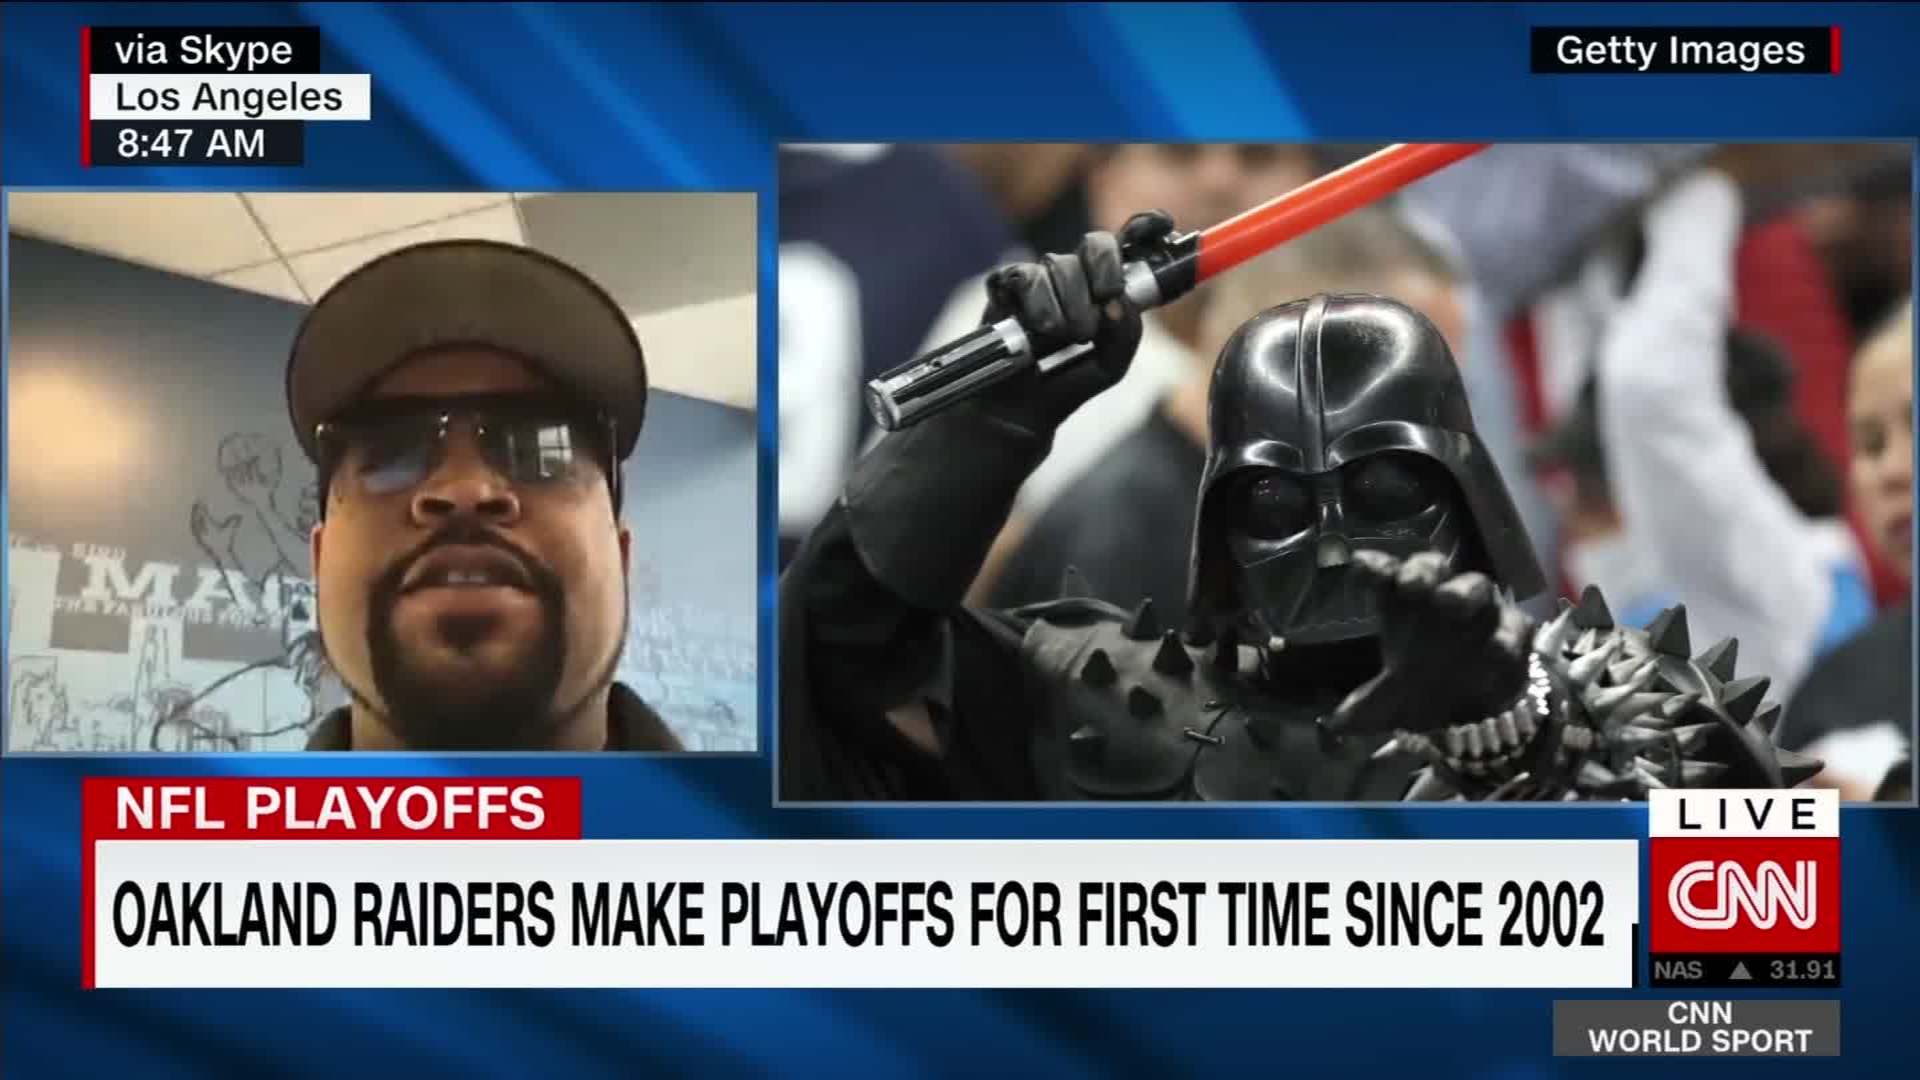 Ice Cube on Oakland Raiders' revival: 'The clowning is over', CNN